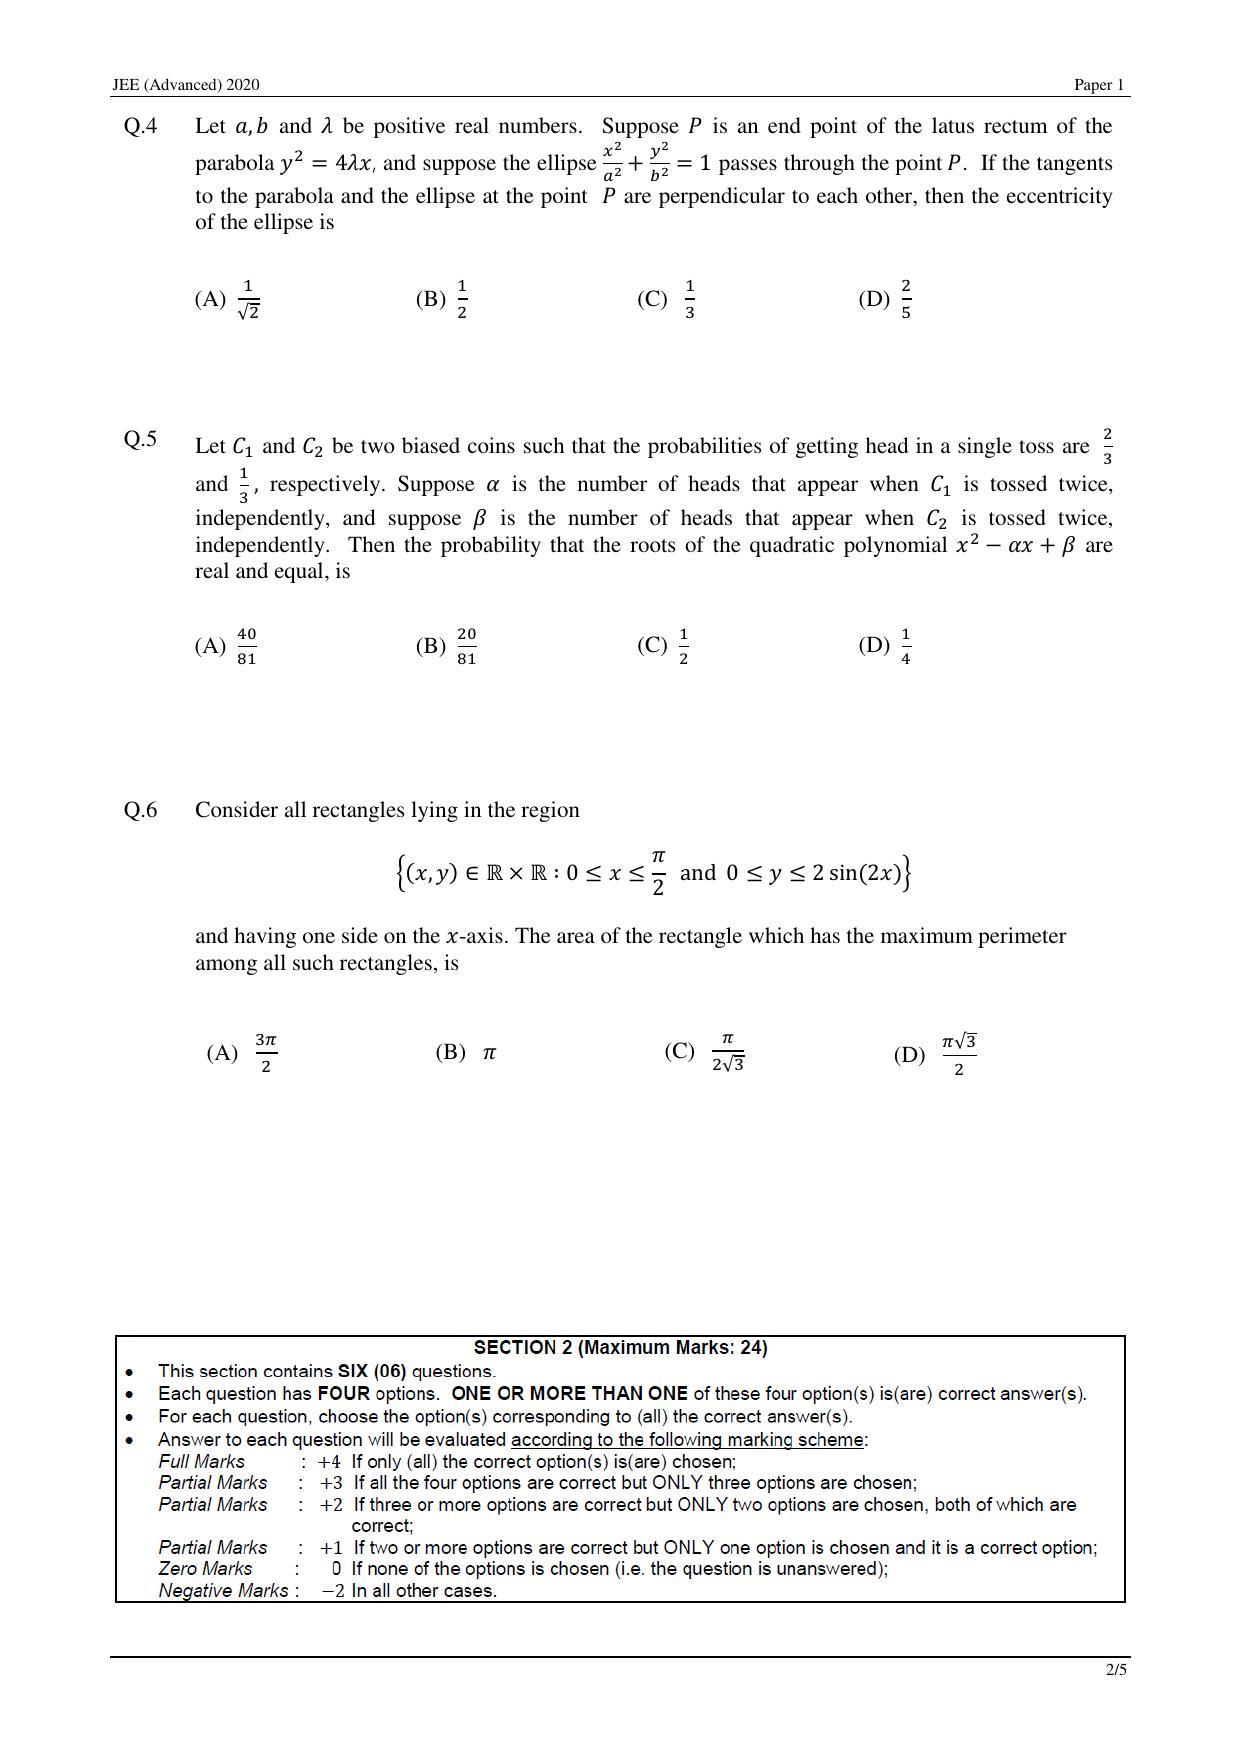 JEE (Advanced) 2020 Paper I - English Question Paper - Page 21